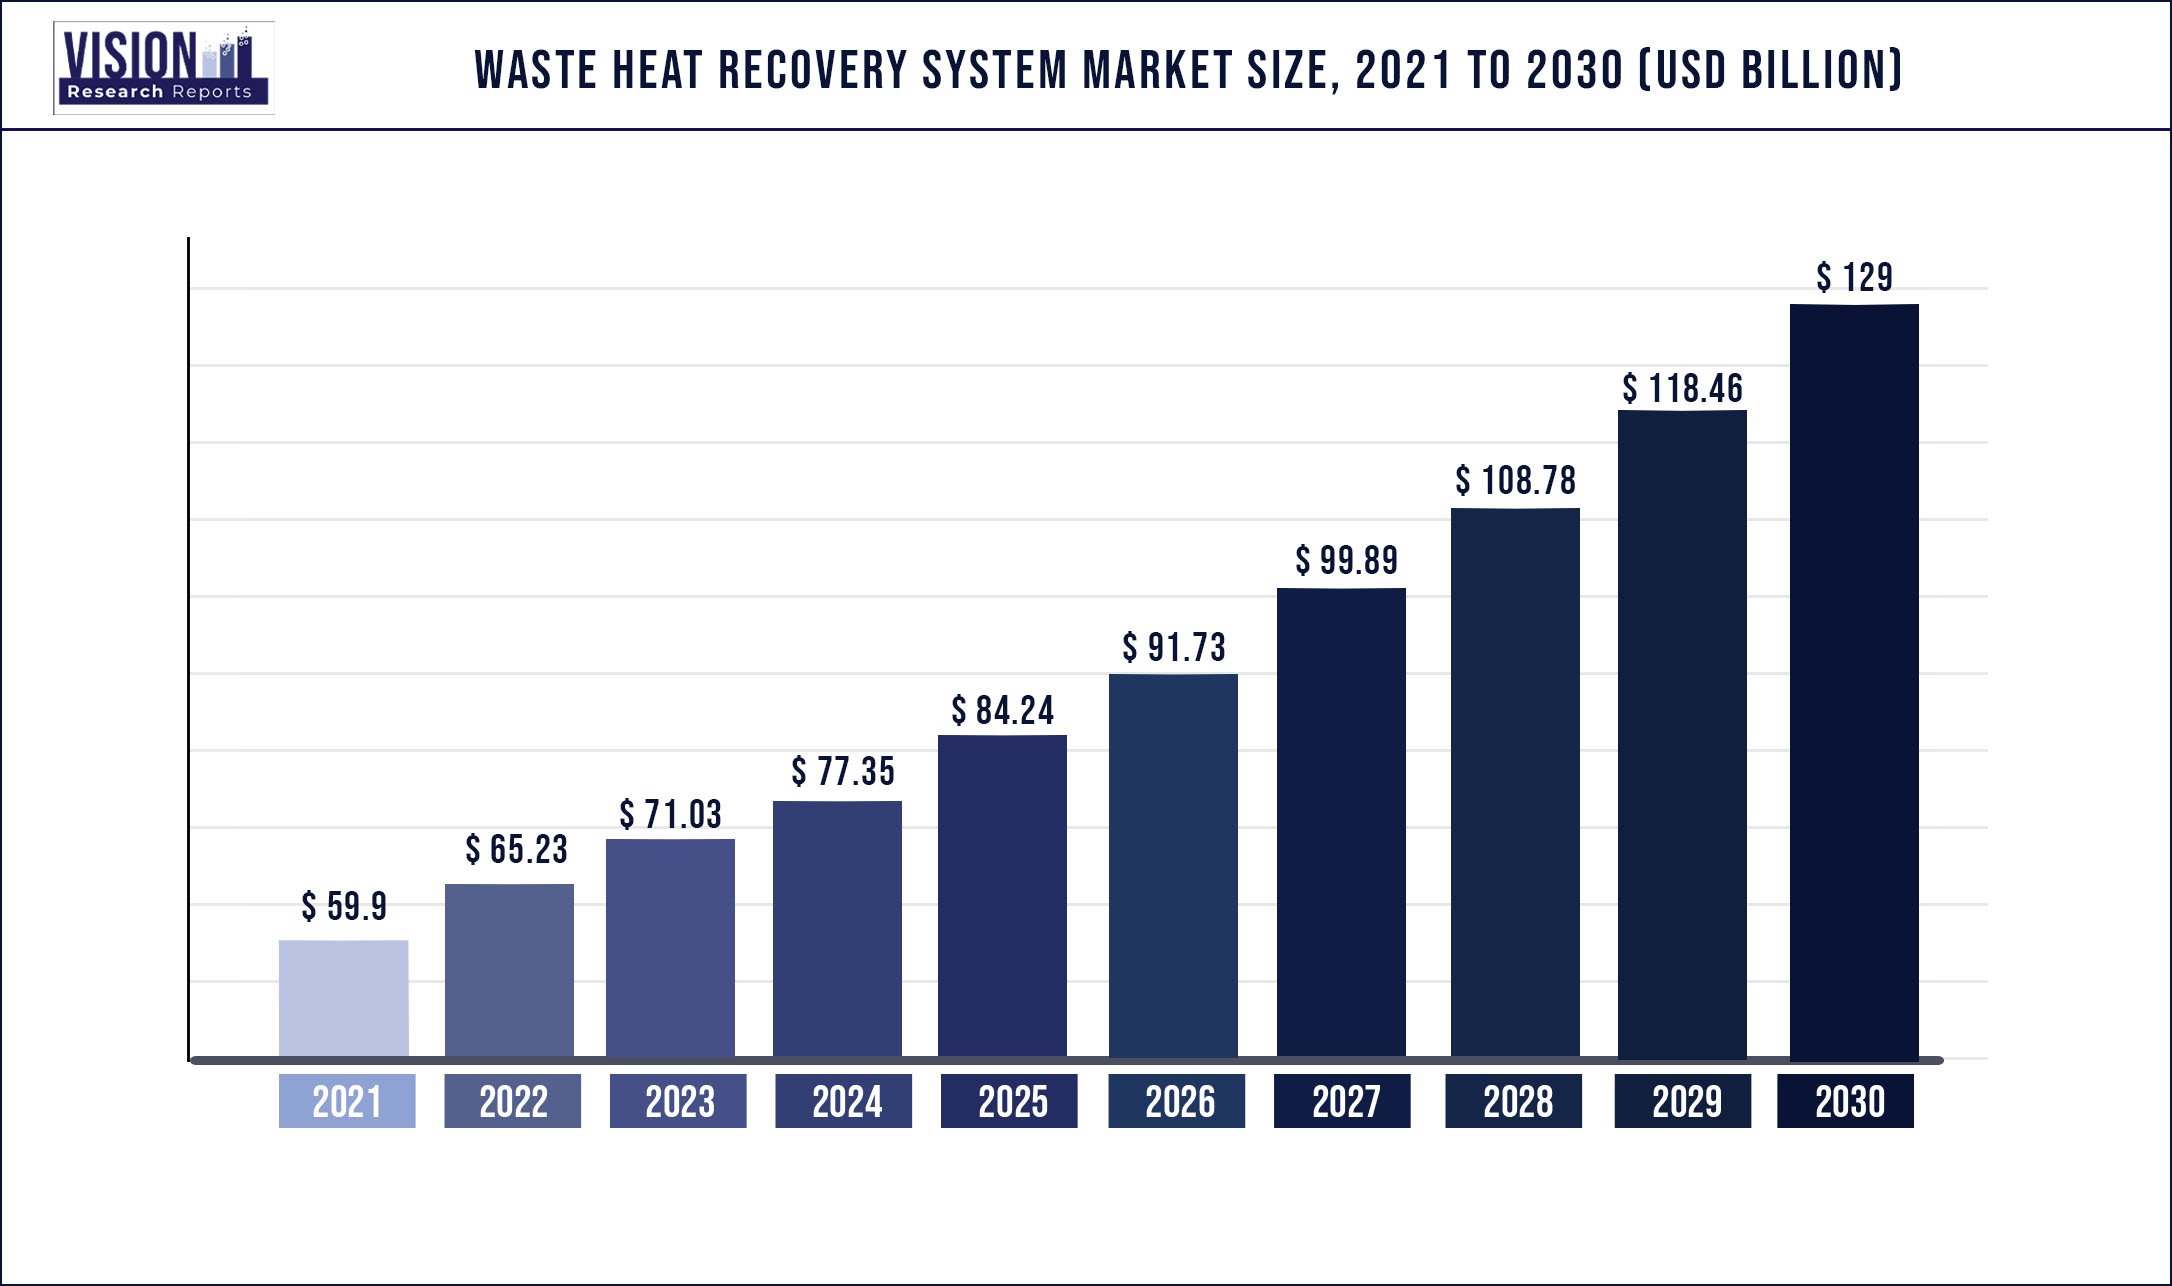 Waste Heat Recovery System Market Size 2021 to 2030